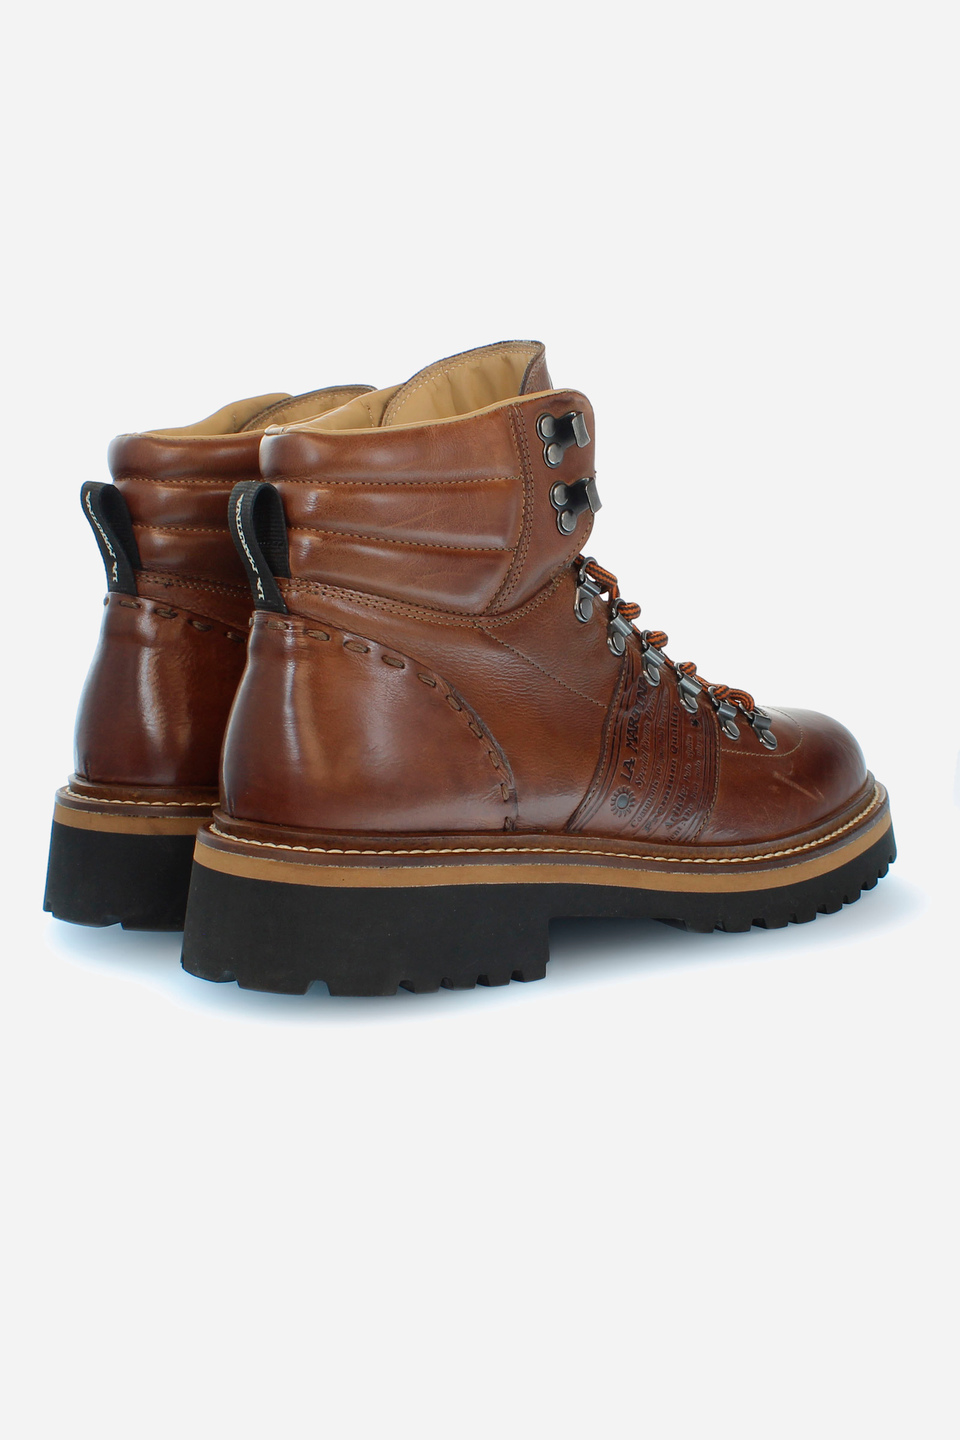 Men's urban style ankle boot in leather | La Martina - Official Online Shop